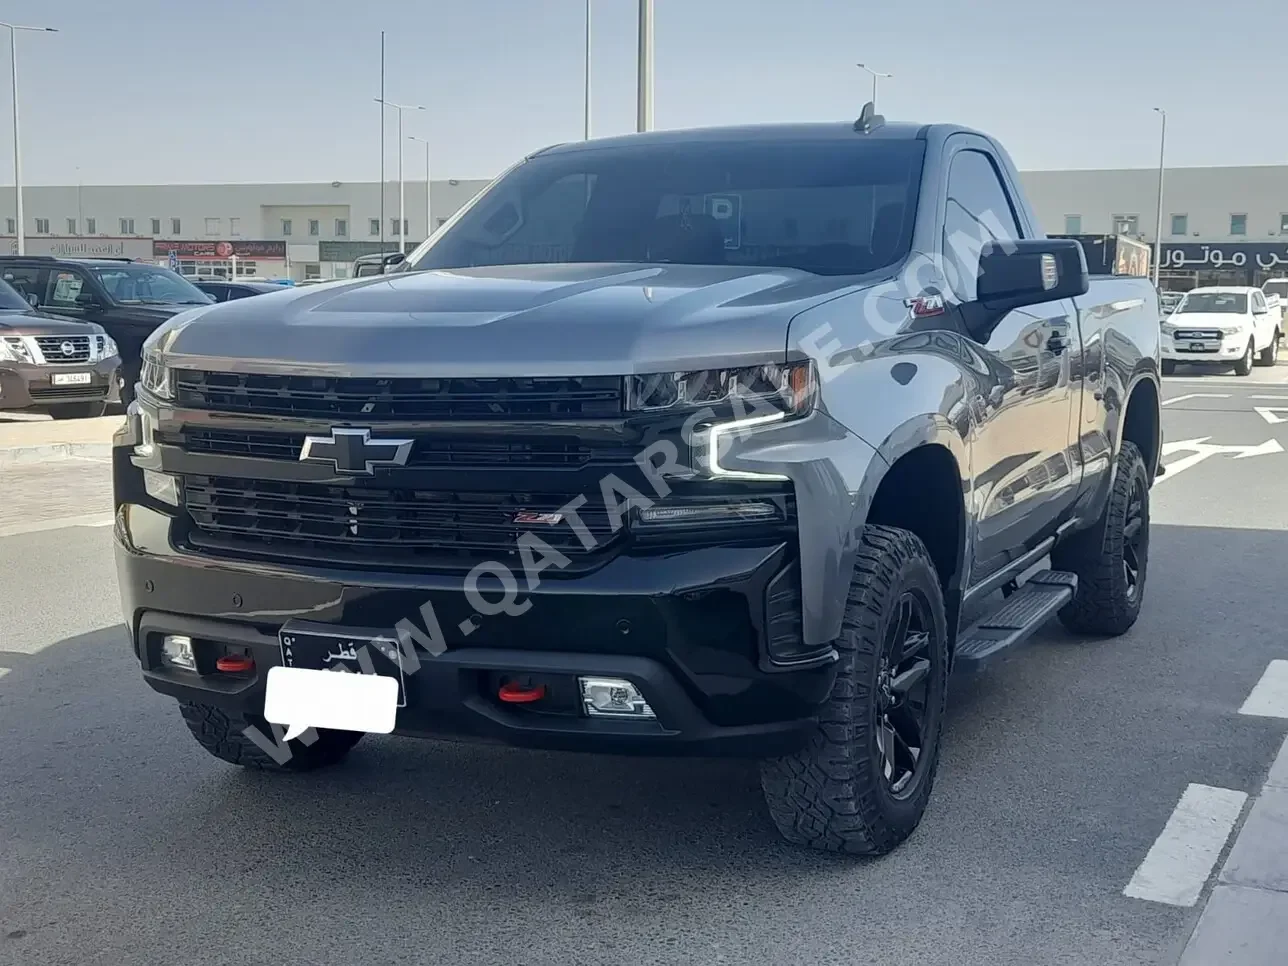 Chevrolet  Silverado  Trail Boss  2021  Automatic  49,000 Km  8 Cylinder  Four Wheel Drive (4WD)  Pick Up  Gray